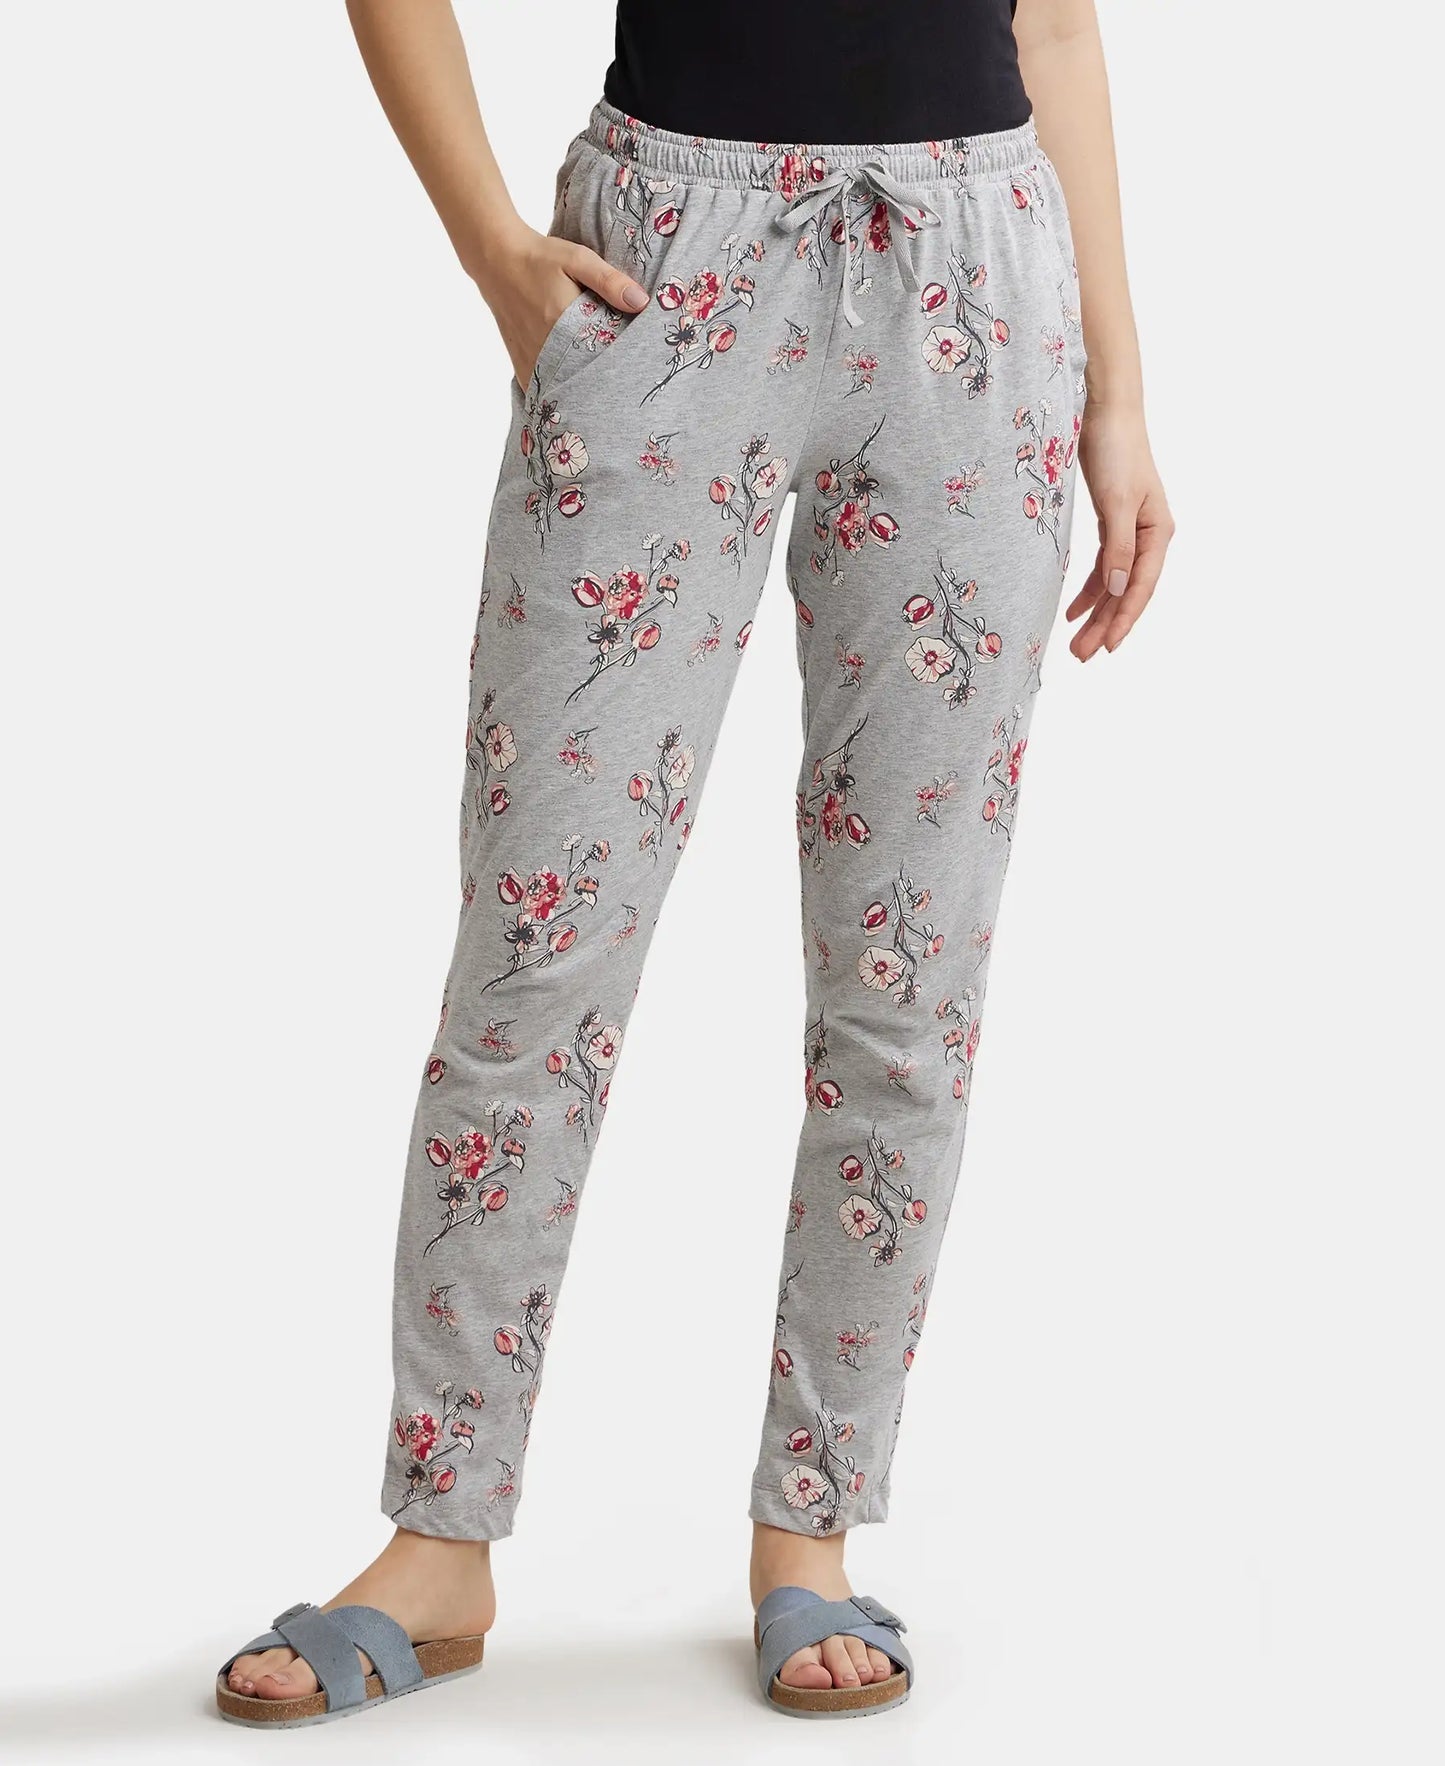 Super Combed Cotton Relaxed Fit Printed Pyjama with Side Pockets - Light Grey Melange-1